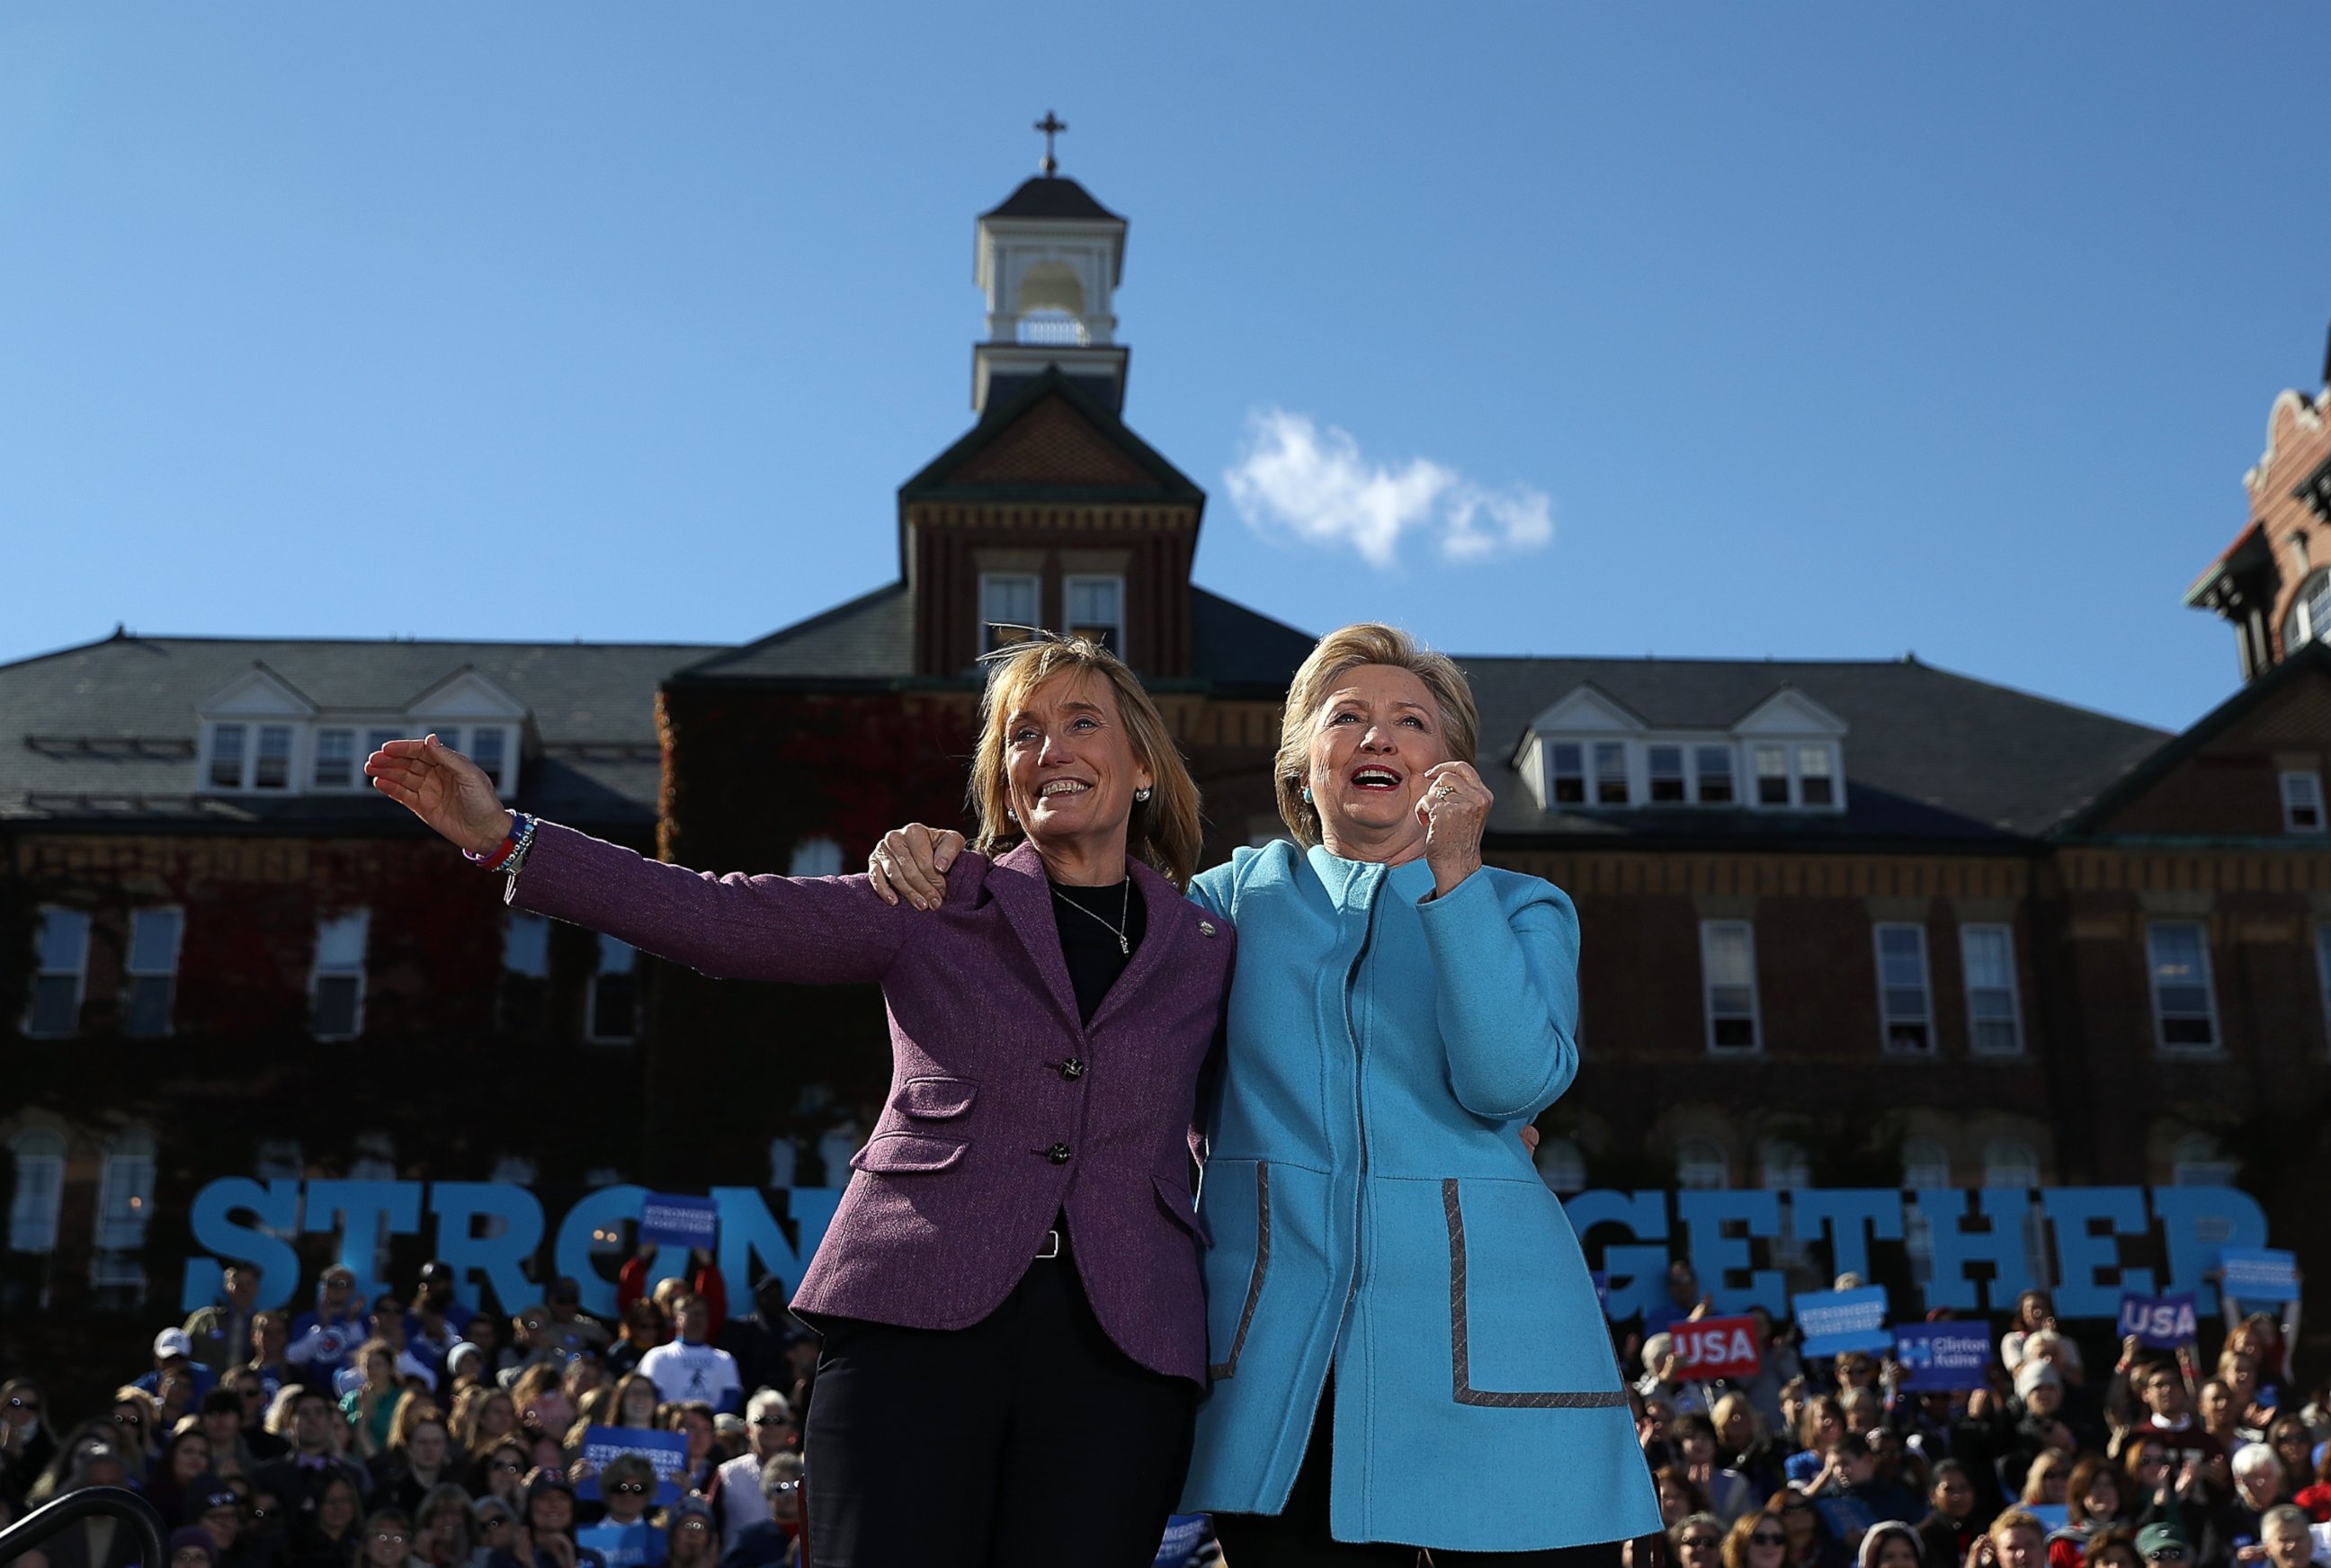 PHOTO: Democratic presidential nominee Hillary Clinton and New Hampshire Gov. Maggie Hassan look on during a campaign rally at Saint Anselm College, Oct. 24, 2016, in Manchester, New Hampshire.